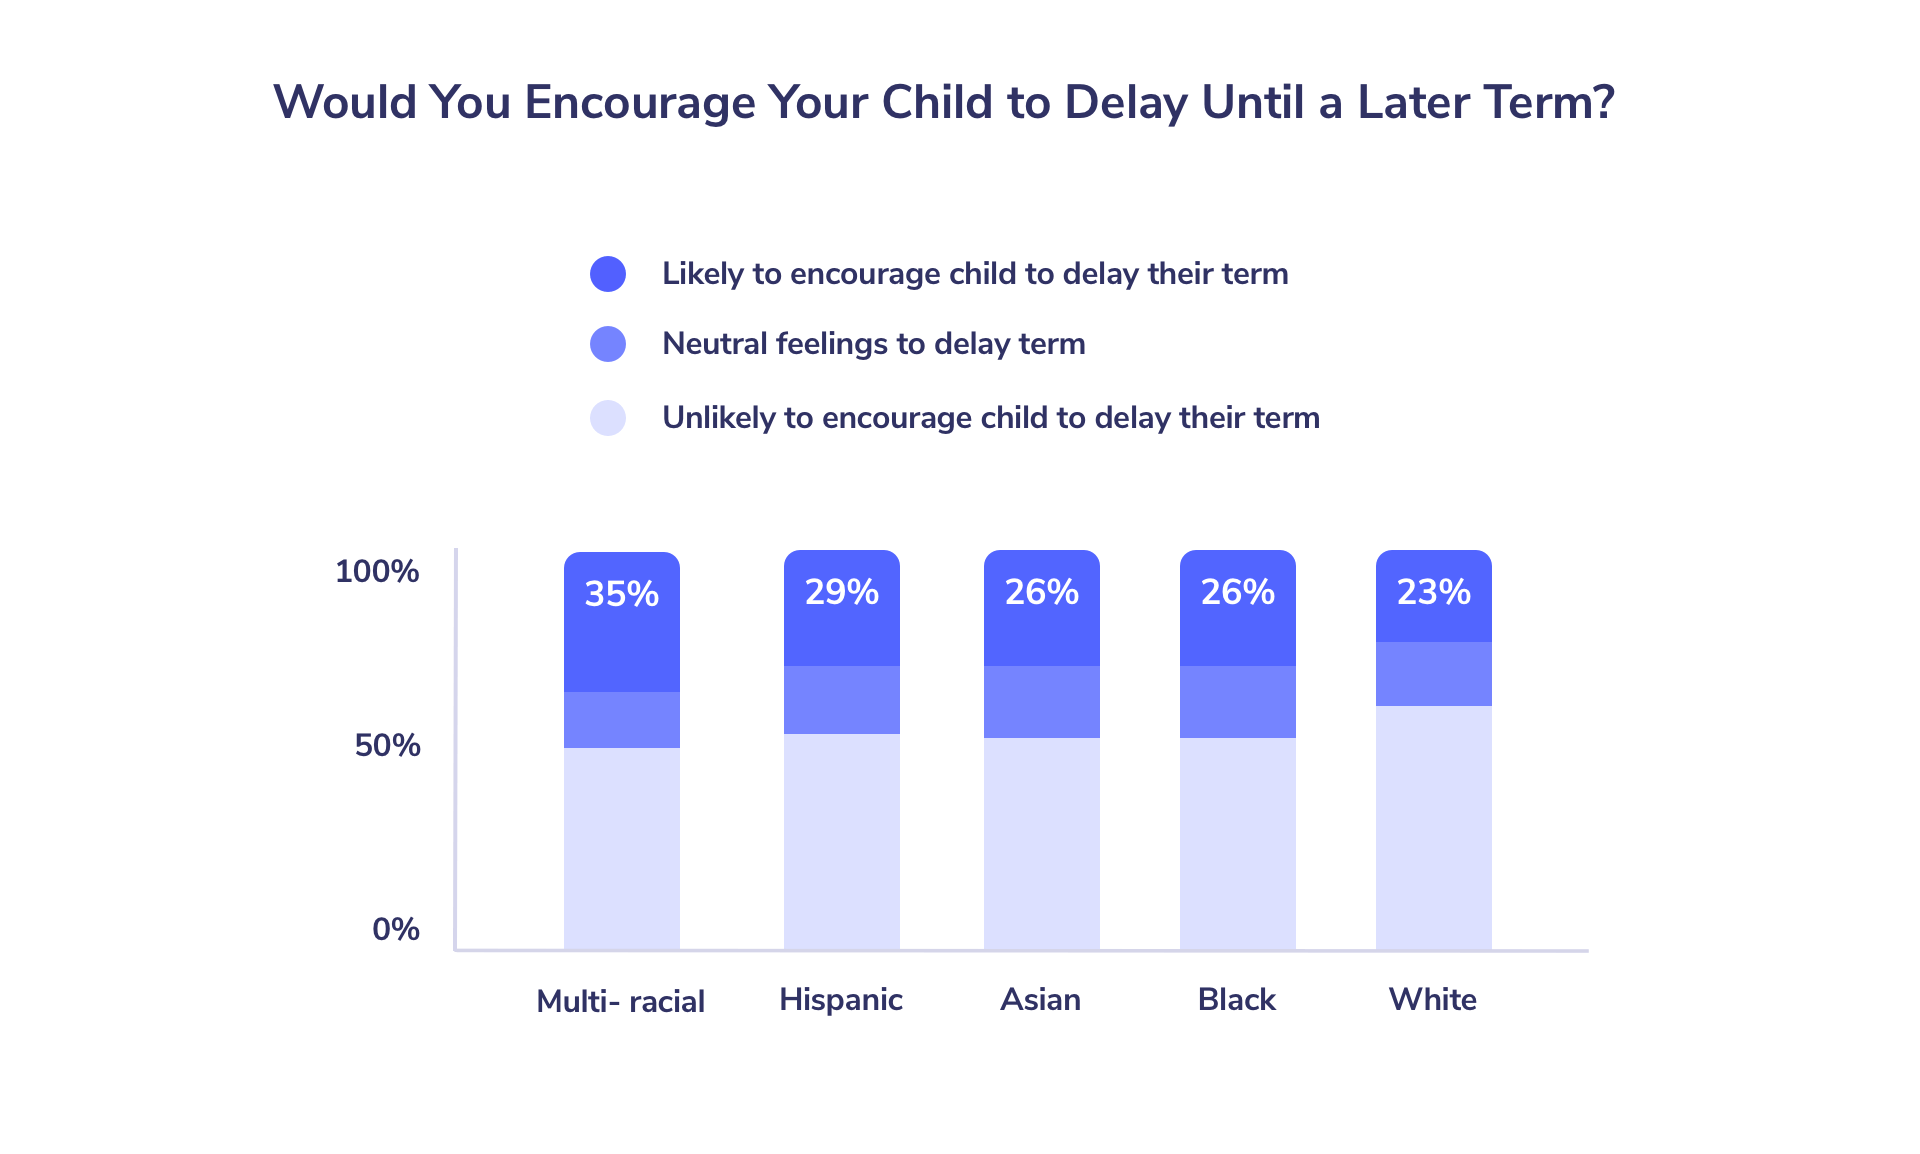 Would you encourage your child to delay to a later term?